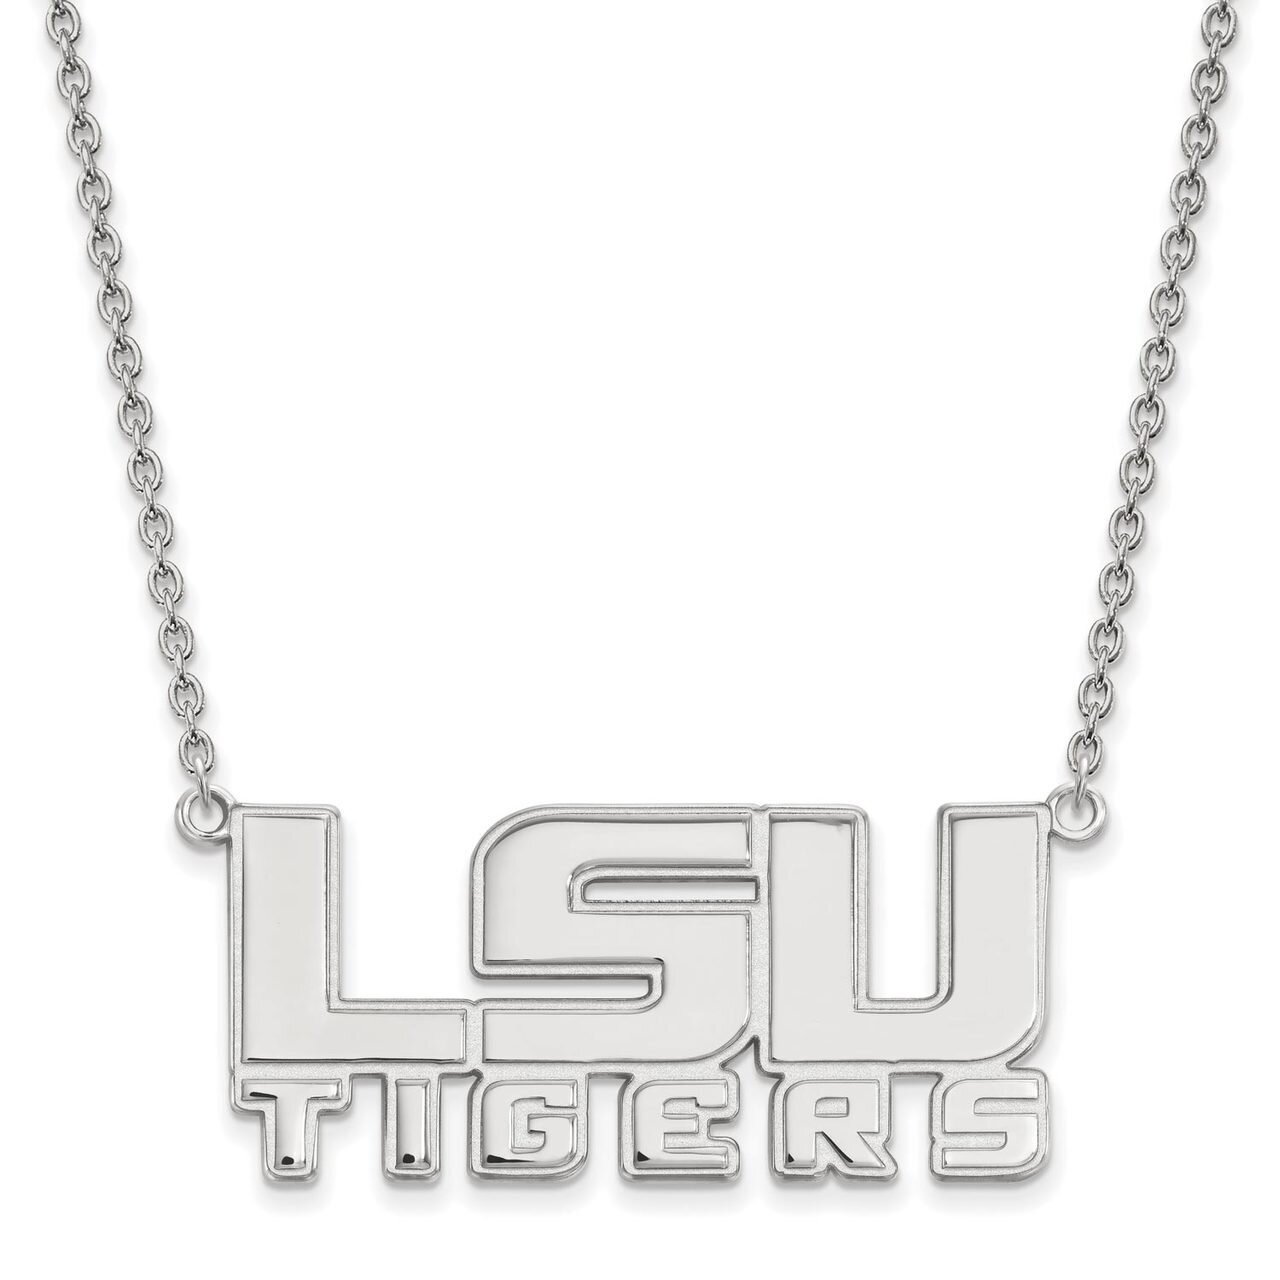 Louisiana State University Large Pendant with Chain Necklace 10k White Gold 1W048LSU-18